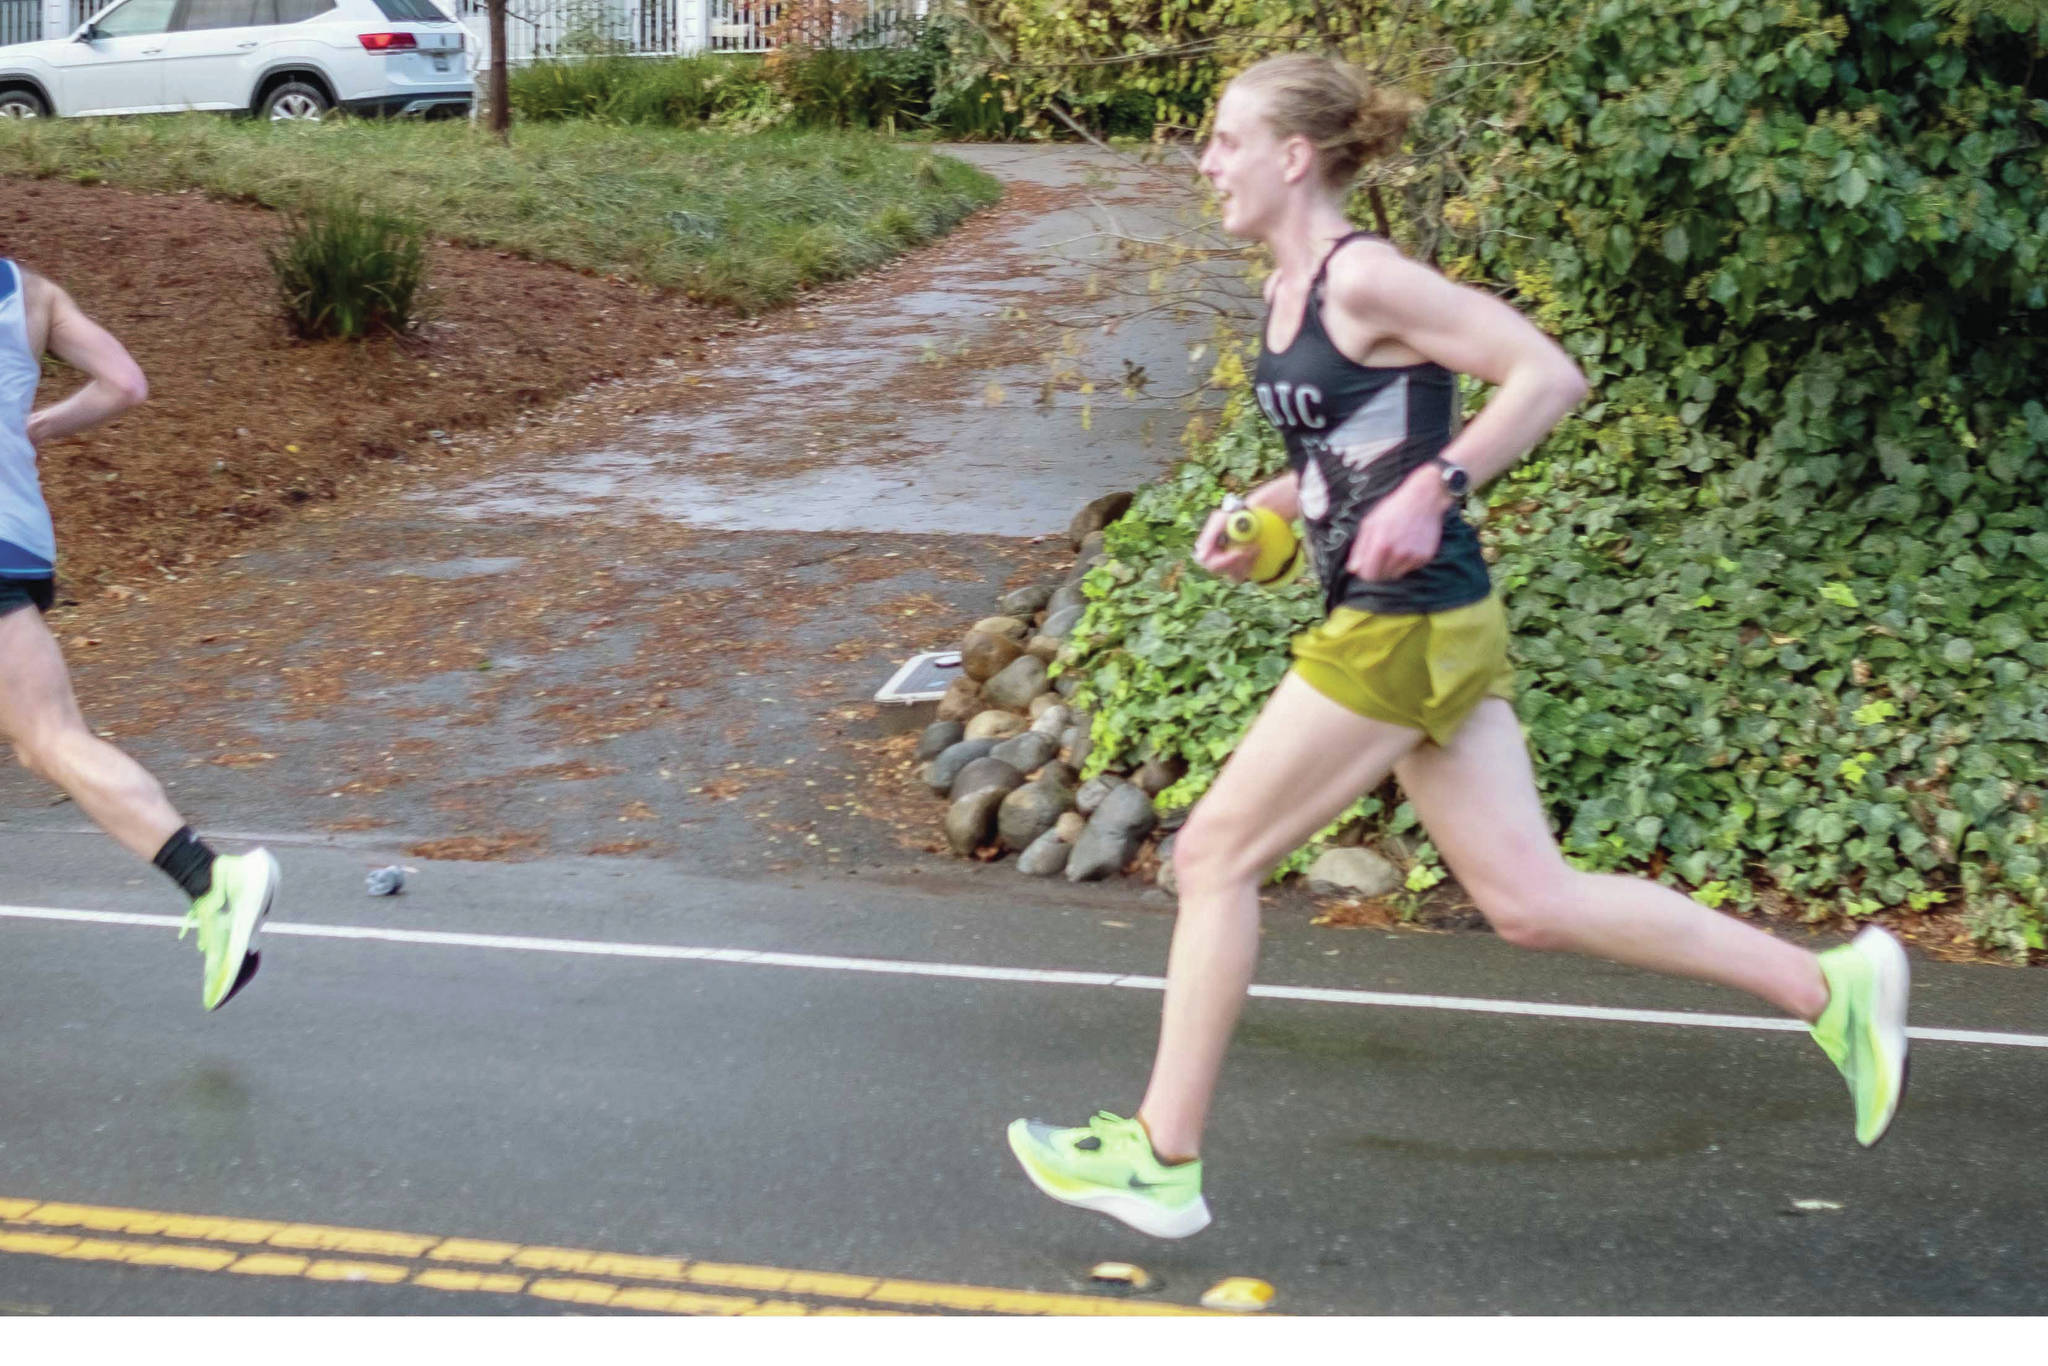 Soldotna’s Megan Youngren competes in the California International Marathon in Sacramento on Sunday, Dec. 8, 2019. (Photo provided by Megan Youngren)